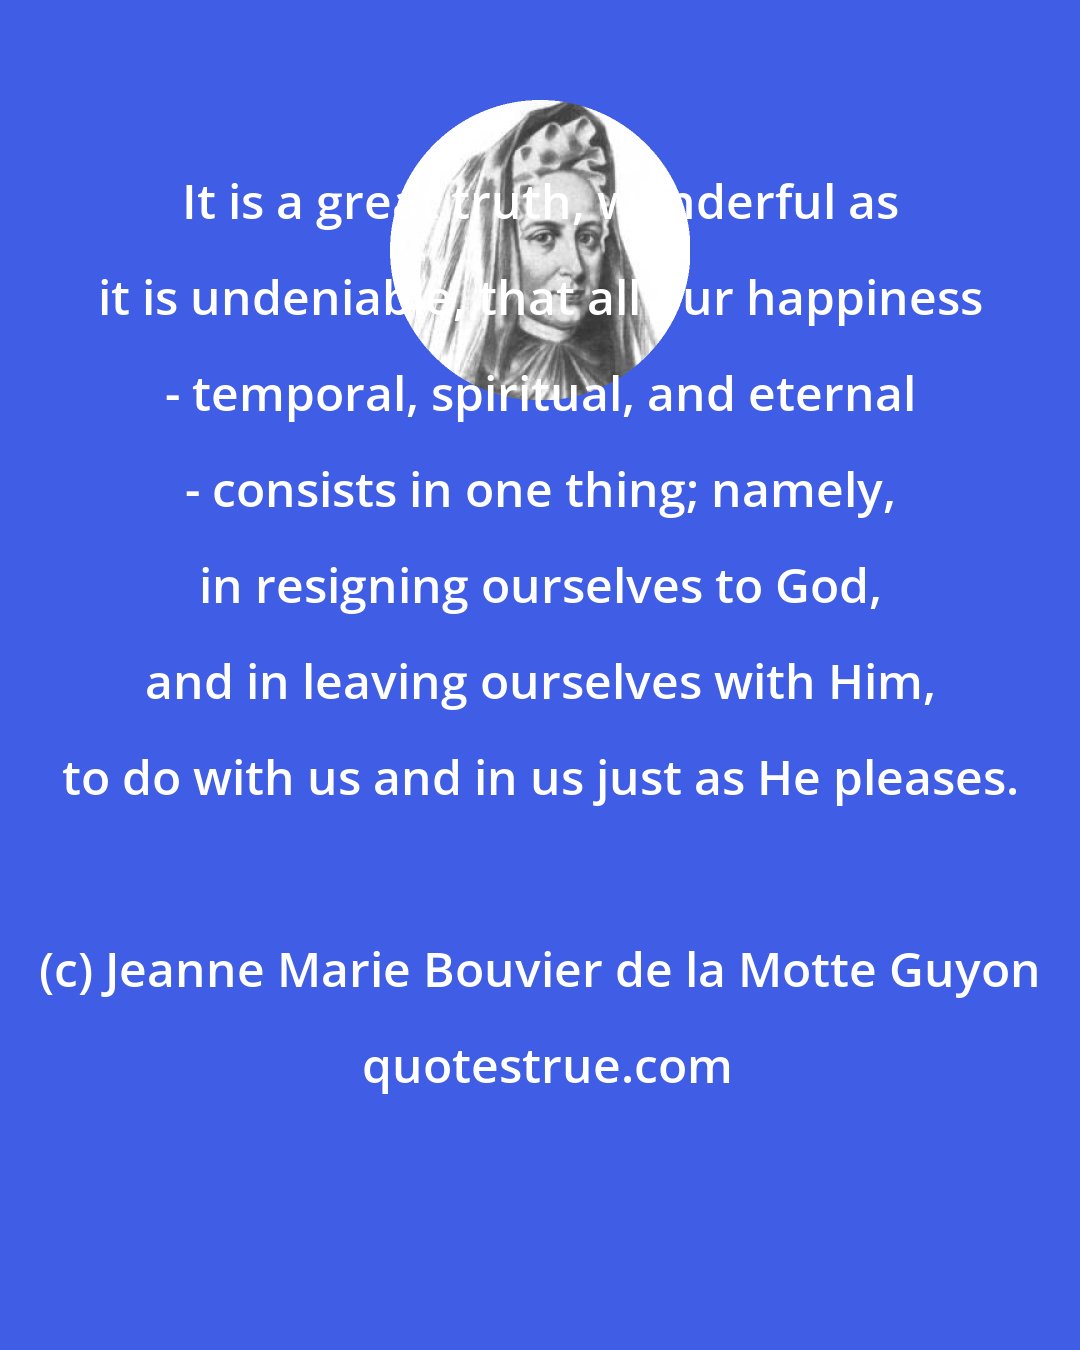 Jeanne Marie Bouvier de la Motte Guyon: It is a great truth, wonderful as it is undeniable, that all our happiness - temporal, spiritual, and eternal - consists in one thing; namely, in resigning ourselves to God, and in leaving ourselves with Him, to do with us and in us just as He pleases.